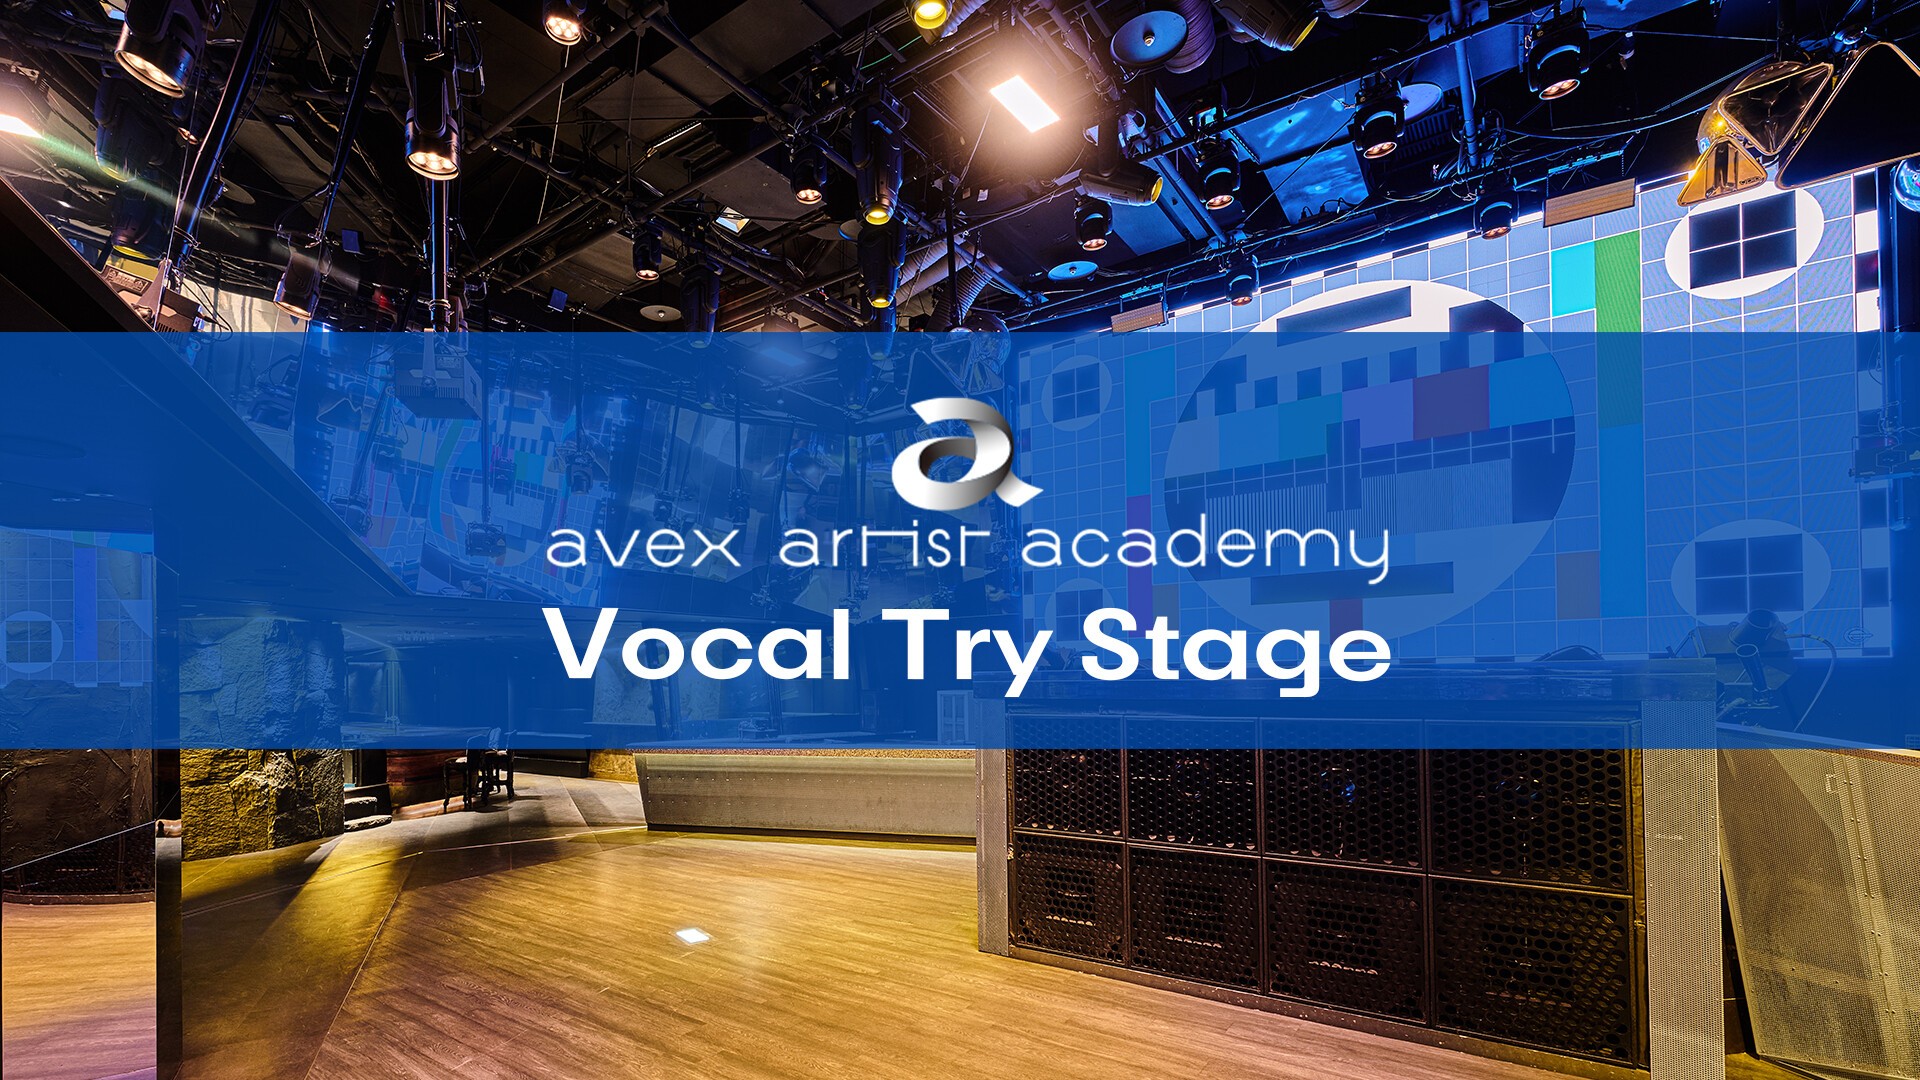 Avex Artist Academy Vocal Try Stage 12 26 土 Tokyo Japan Twh